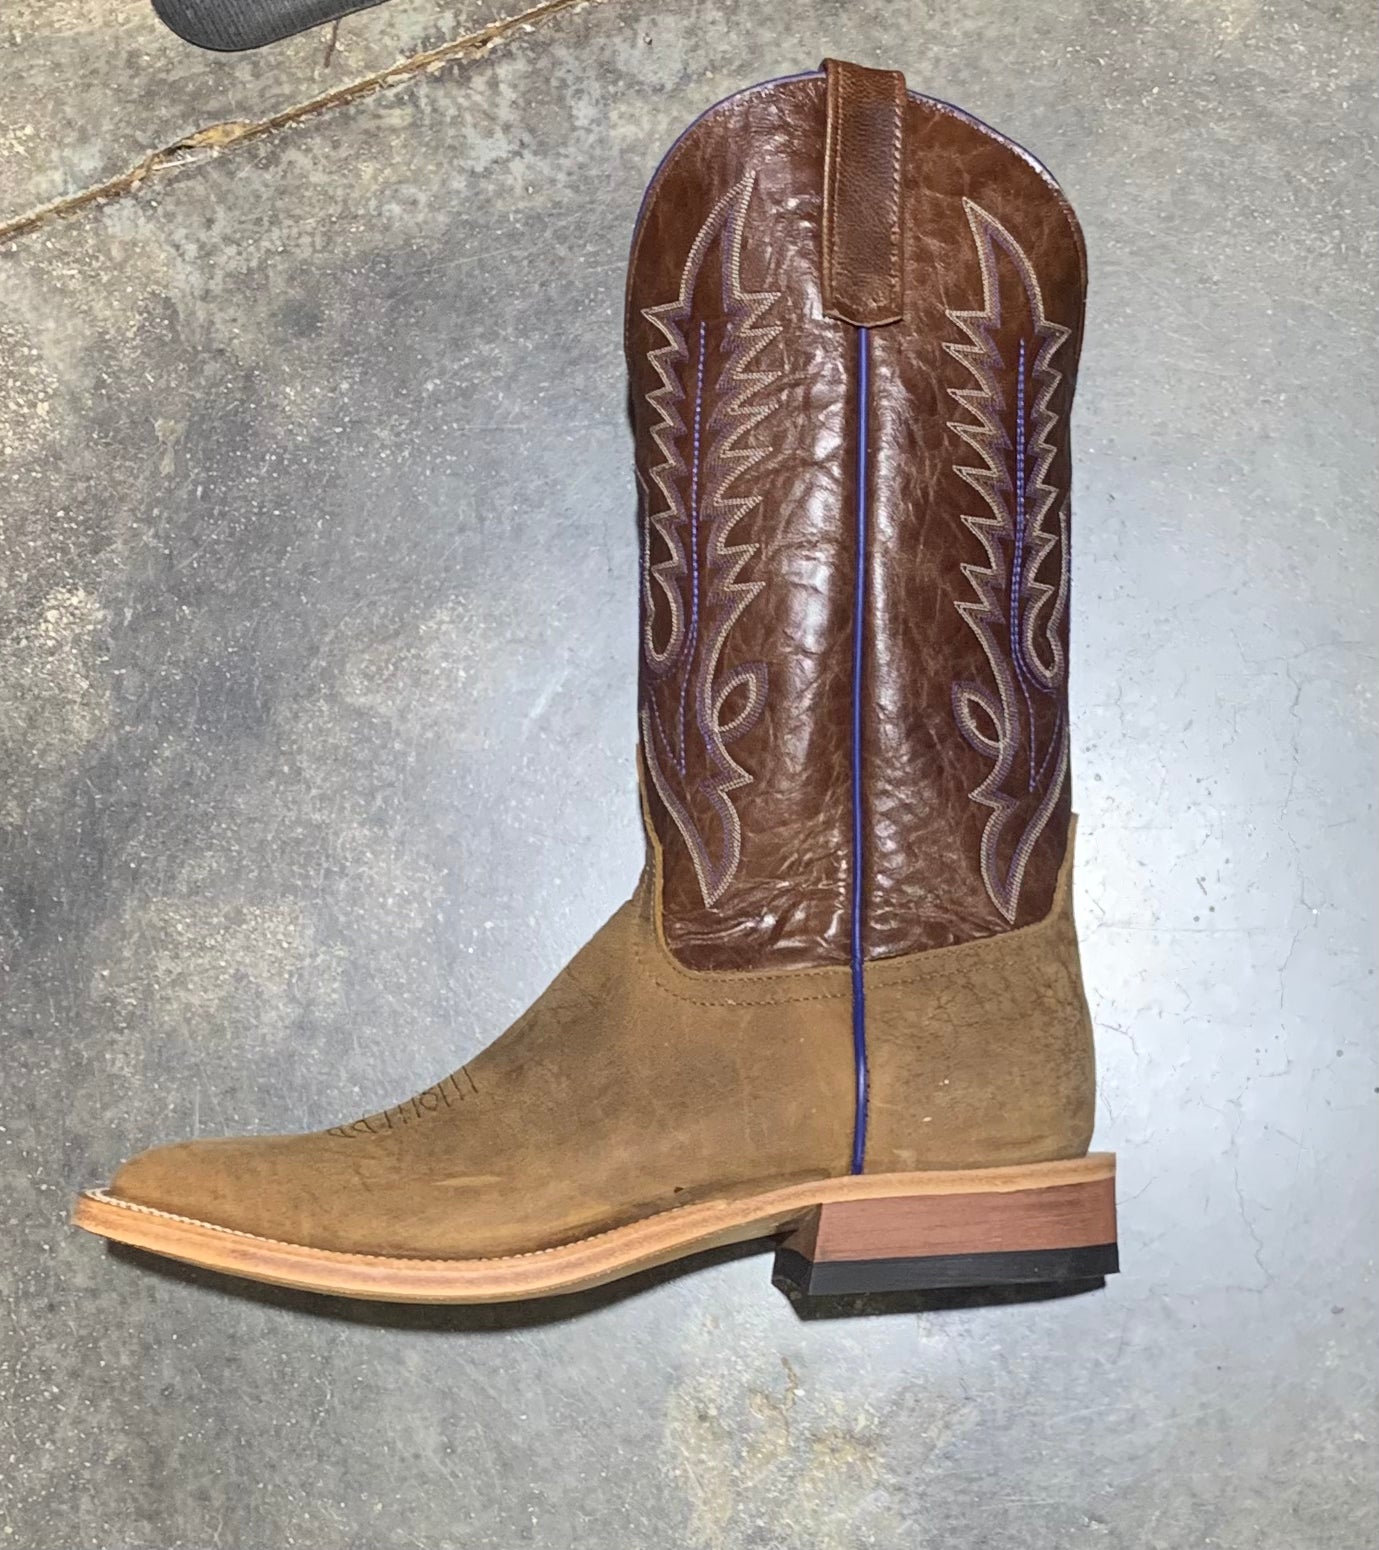 ANDERSON BEAN BRAHMAN BISON MENS BOOT – Yee Haw Ranch Outfitters